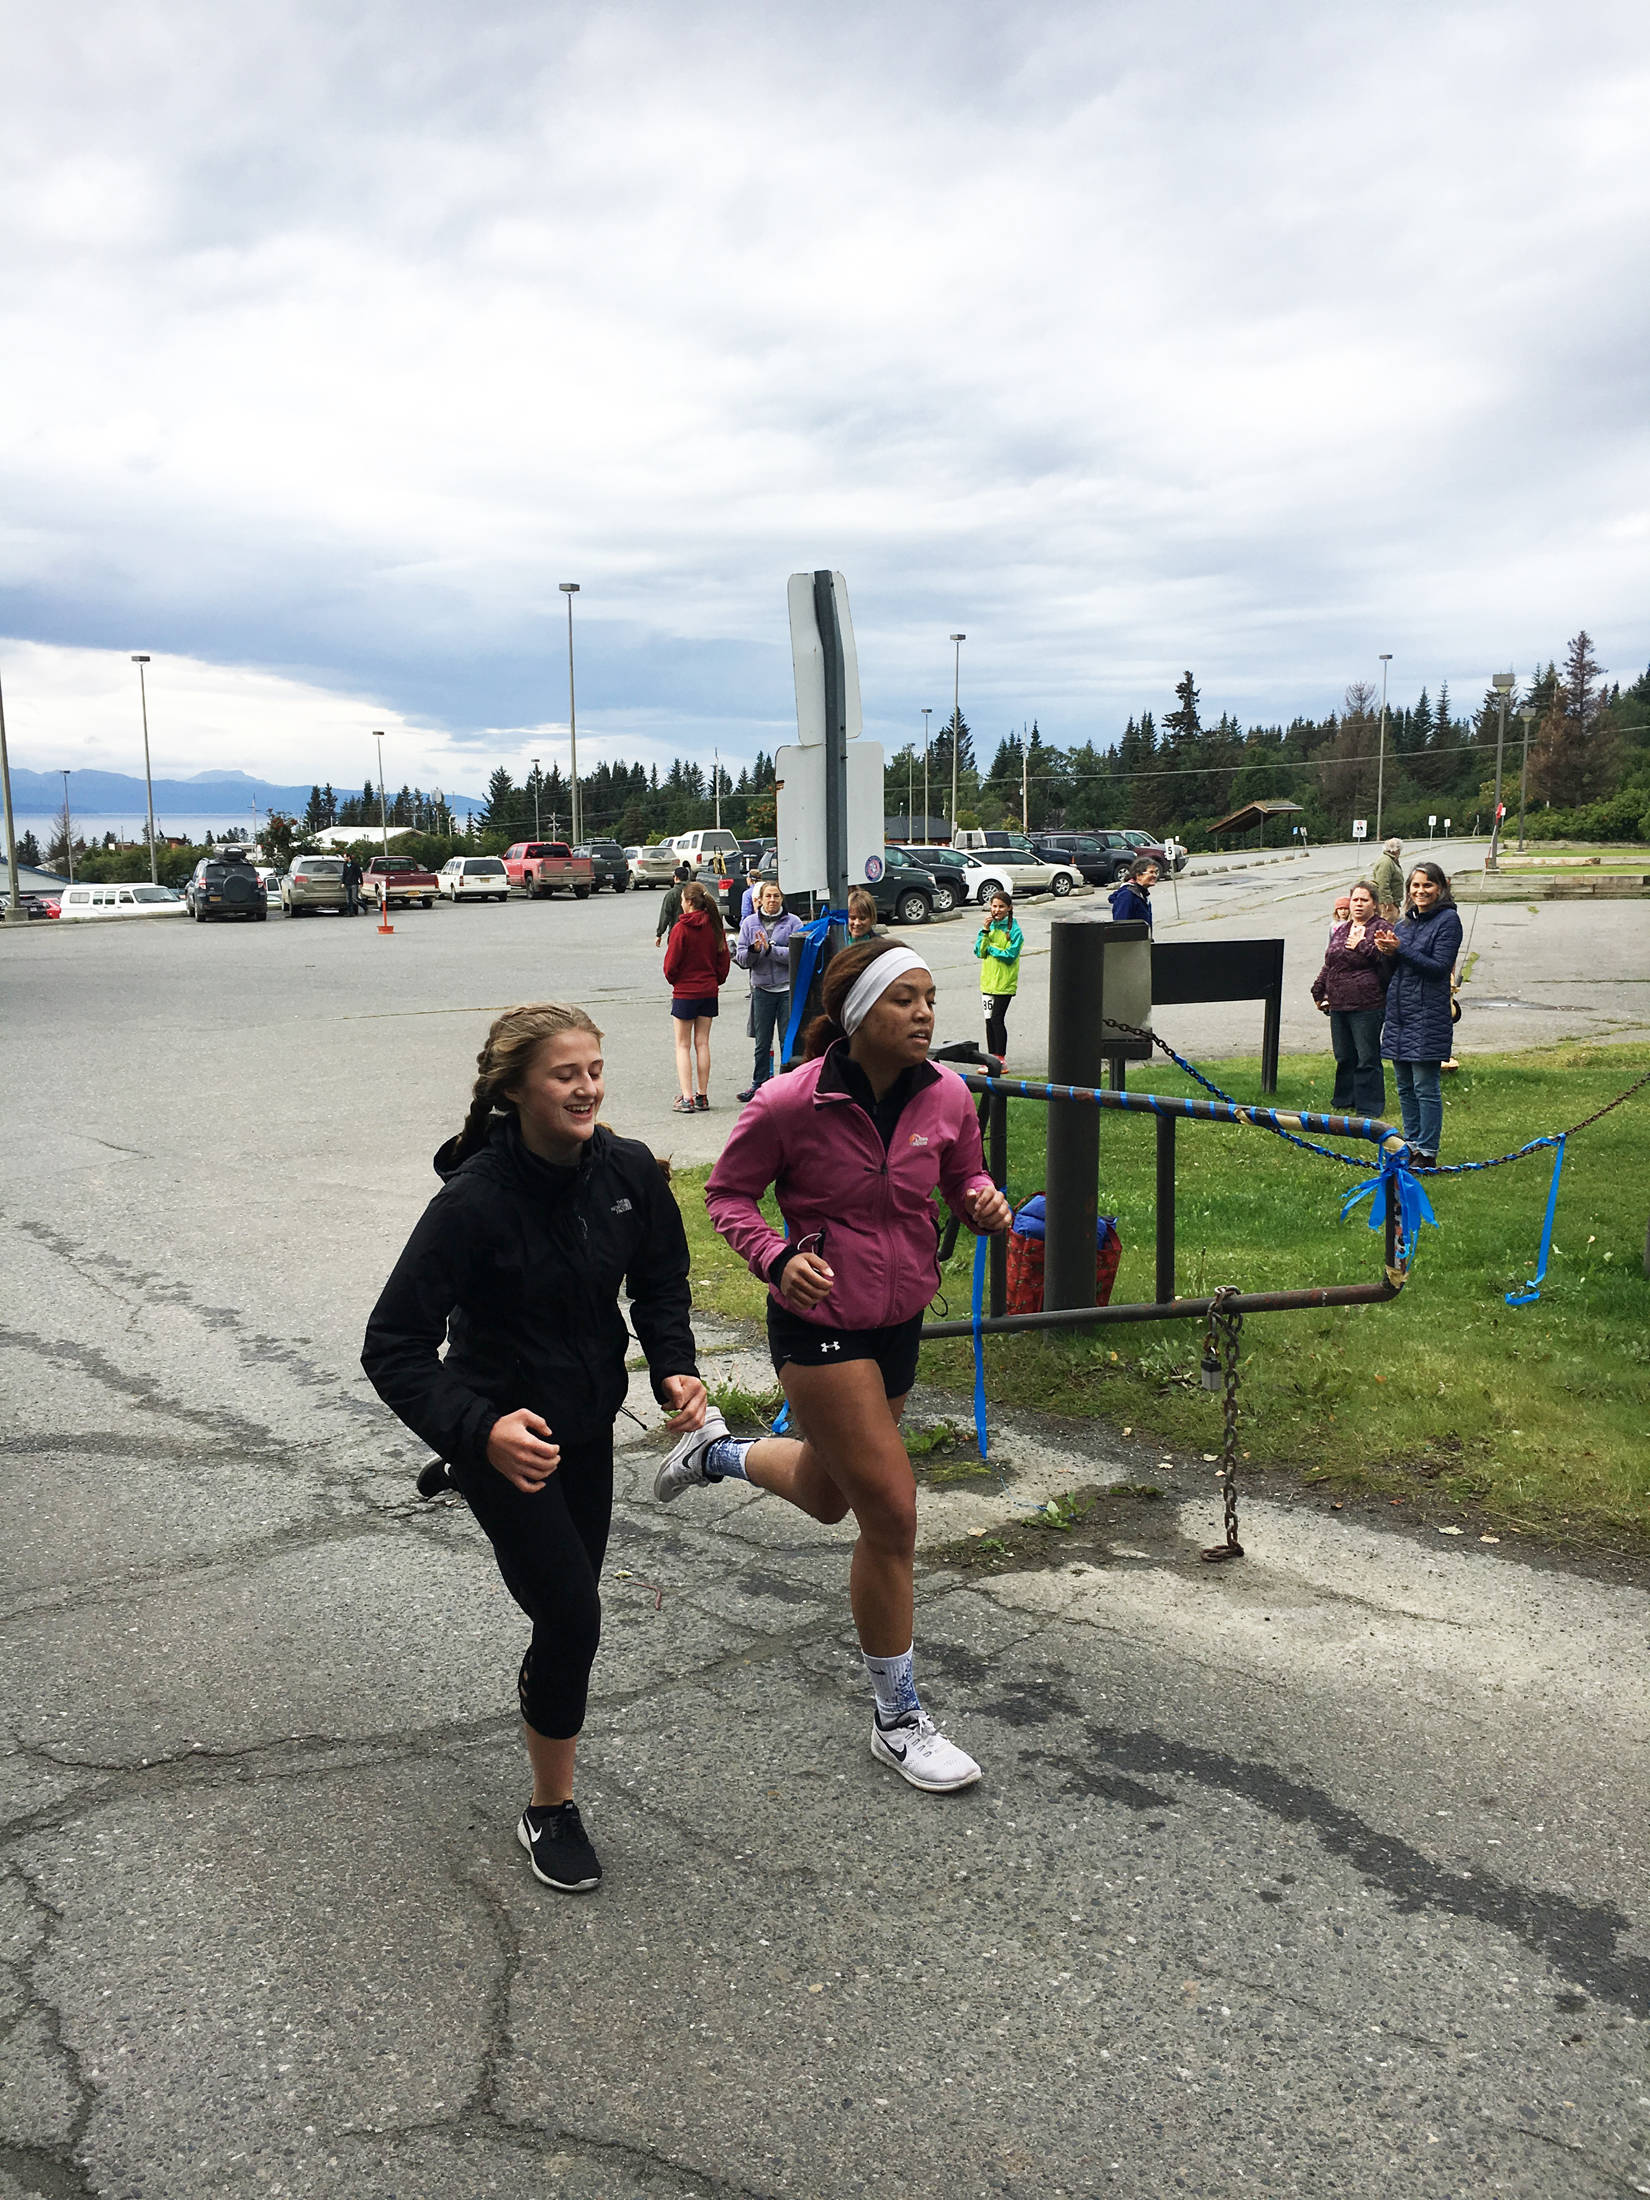 Homer Mariner swimmers Adeline Berry, left and Alia Bales cross the finish line of the Homer Mariner Triathlon on Saturday, Sept. 2, 2017 at the high school in Homer, Alaska. The two tied for fourth place in the 13-17 age group. (Photo courtesy Paul Story)